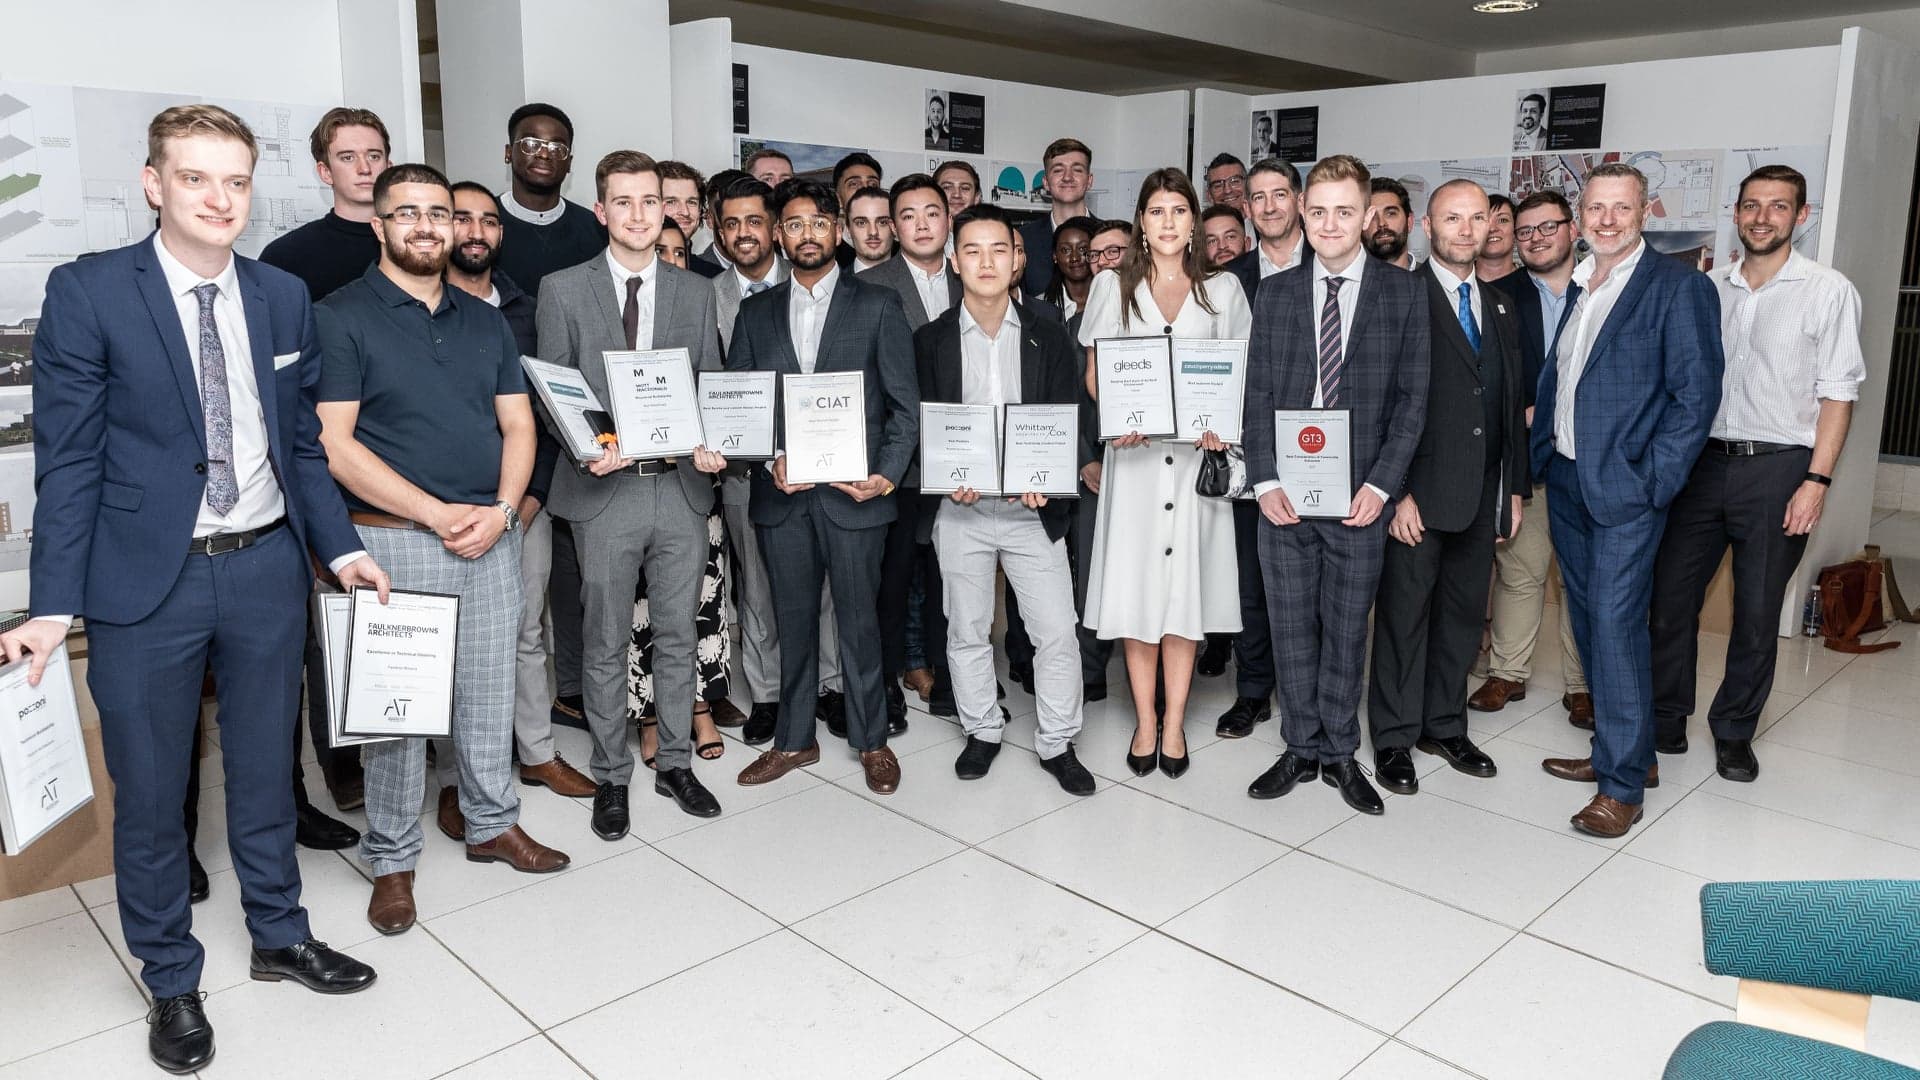 CPW SUPPORTS NOTTINGHAM RISING STARS FOR SECOND YEAR RUNNING @CpwEastMids